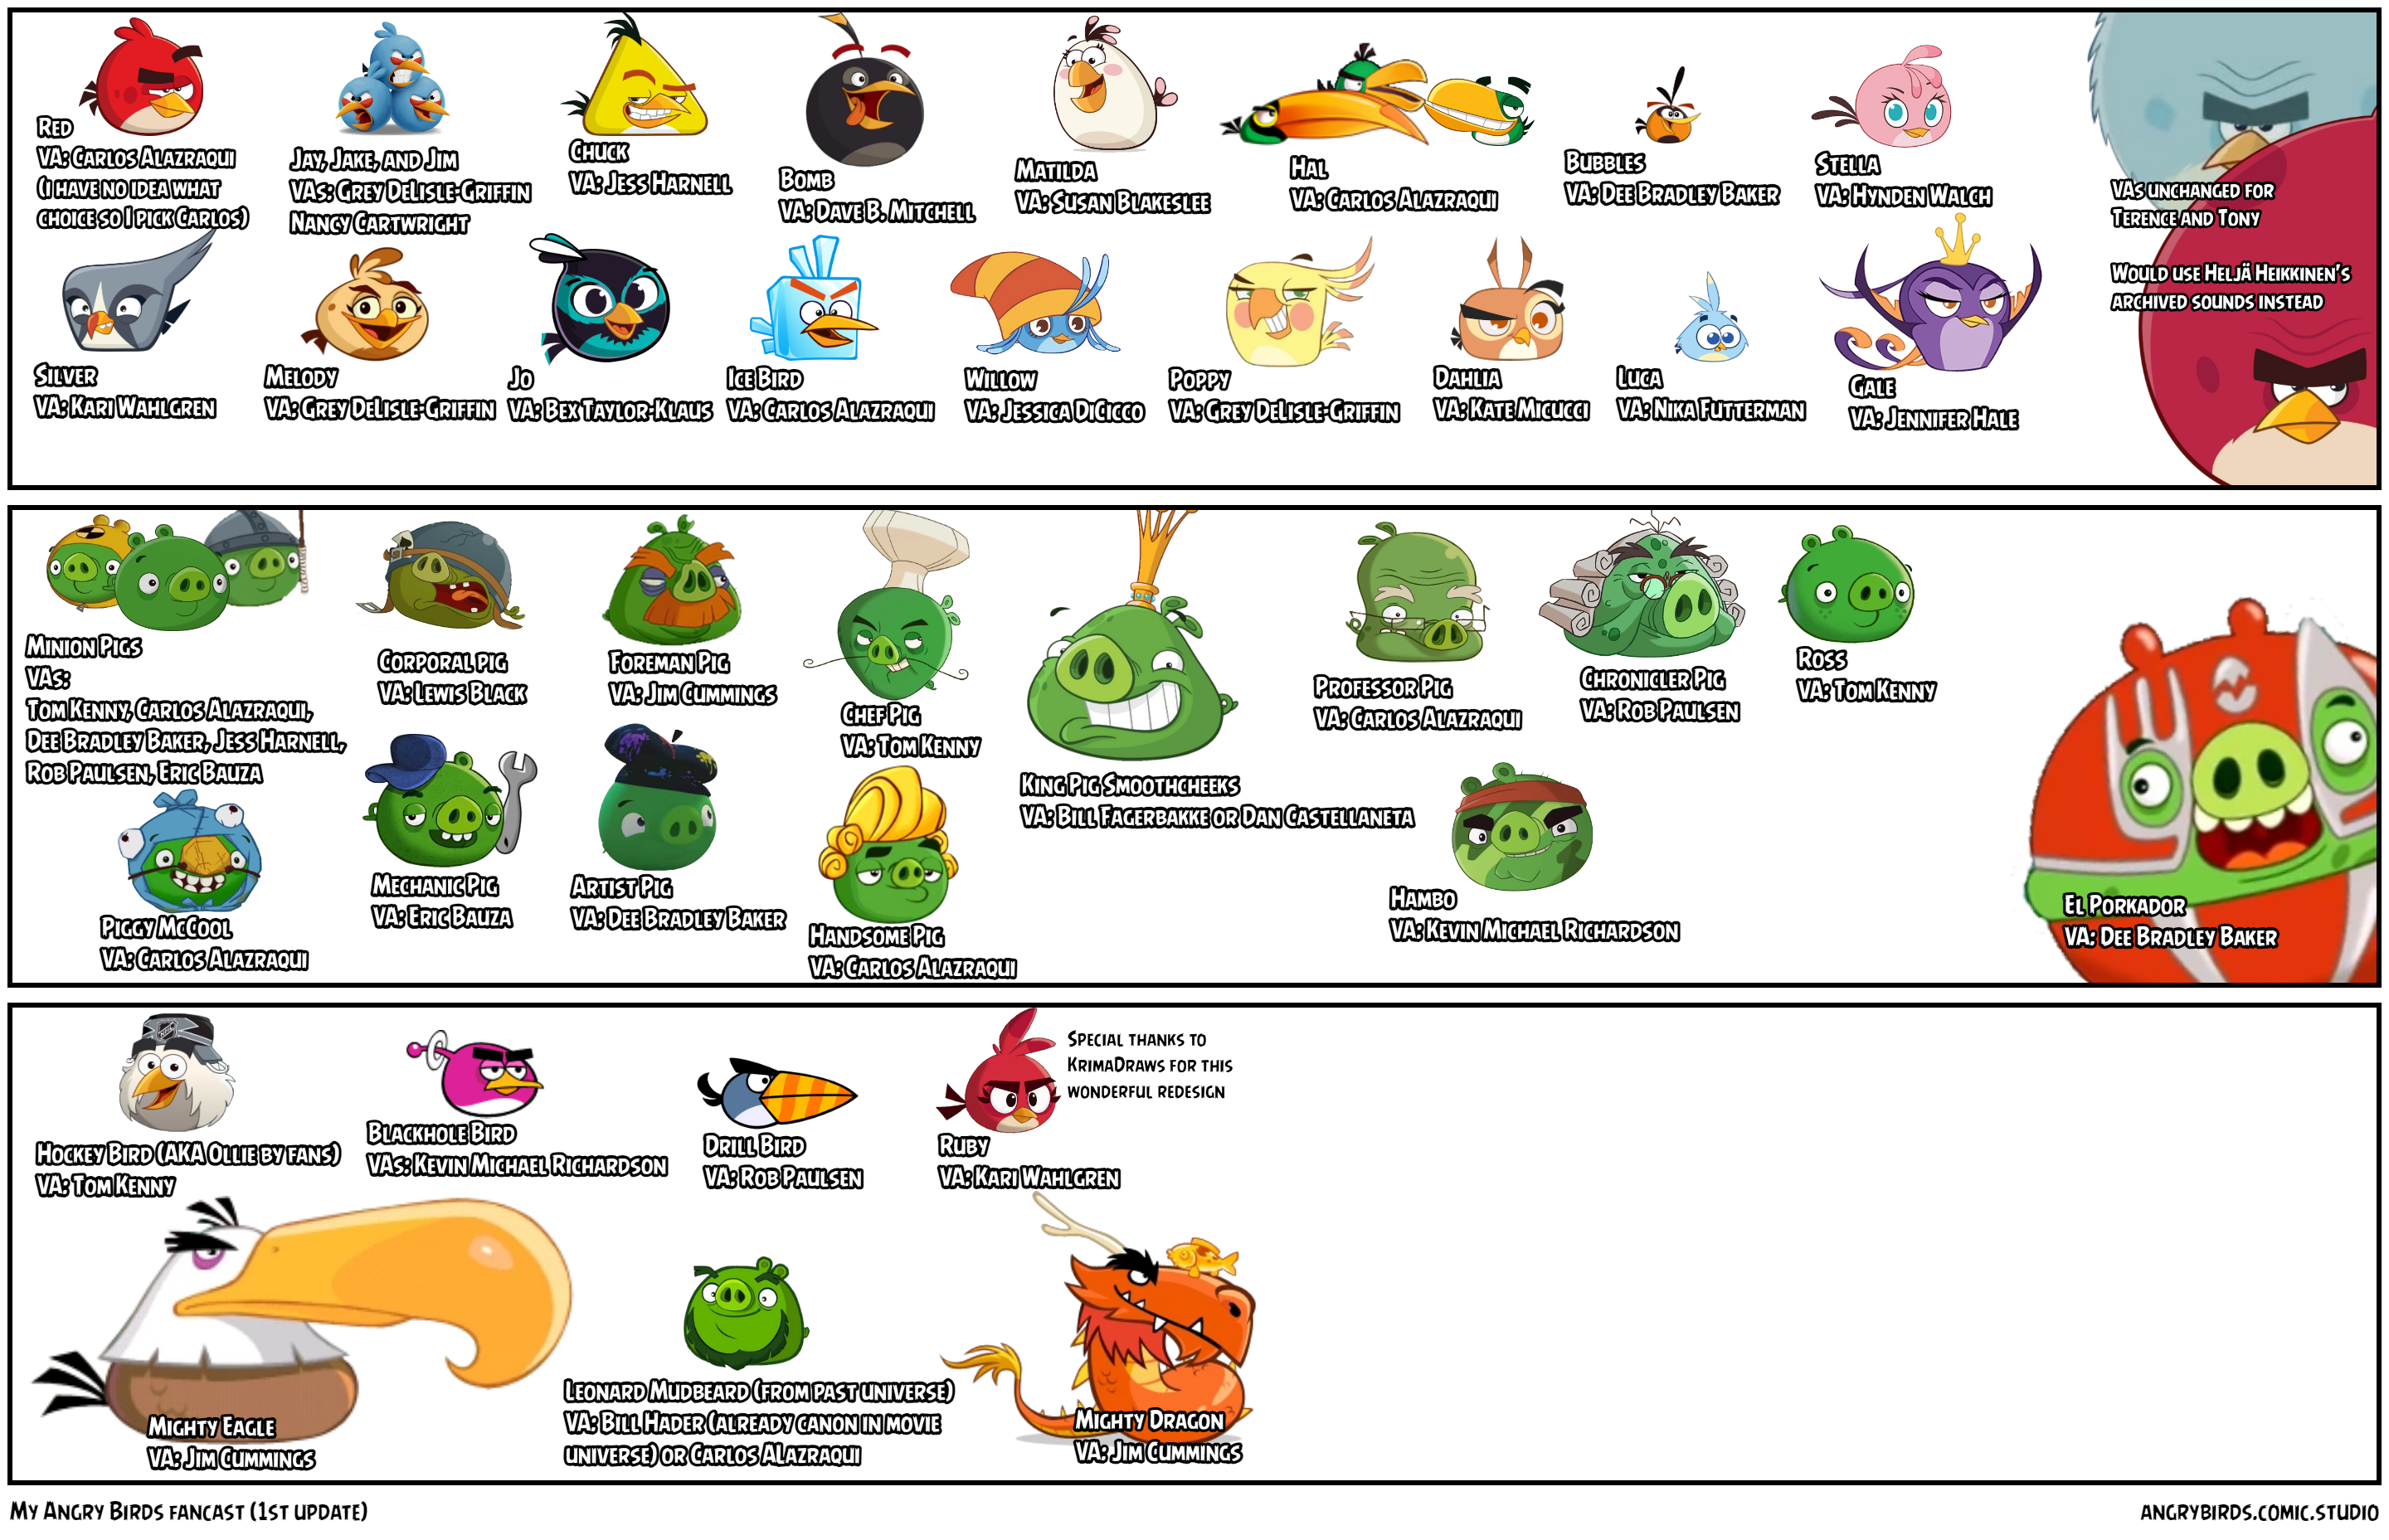 My Angry Birds fancast (1st update)